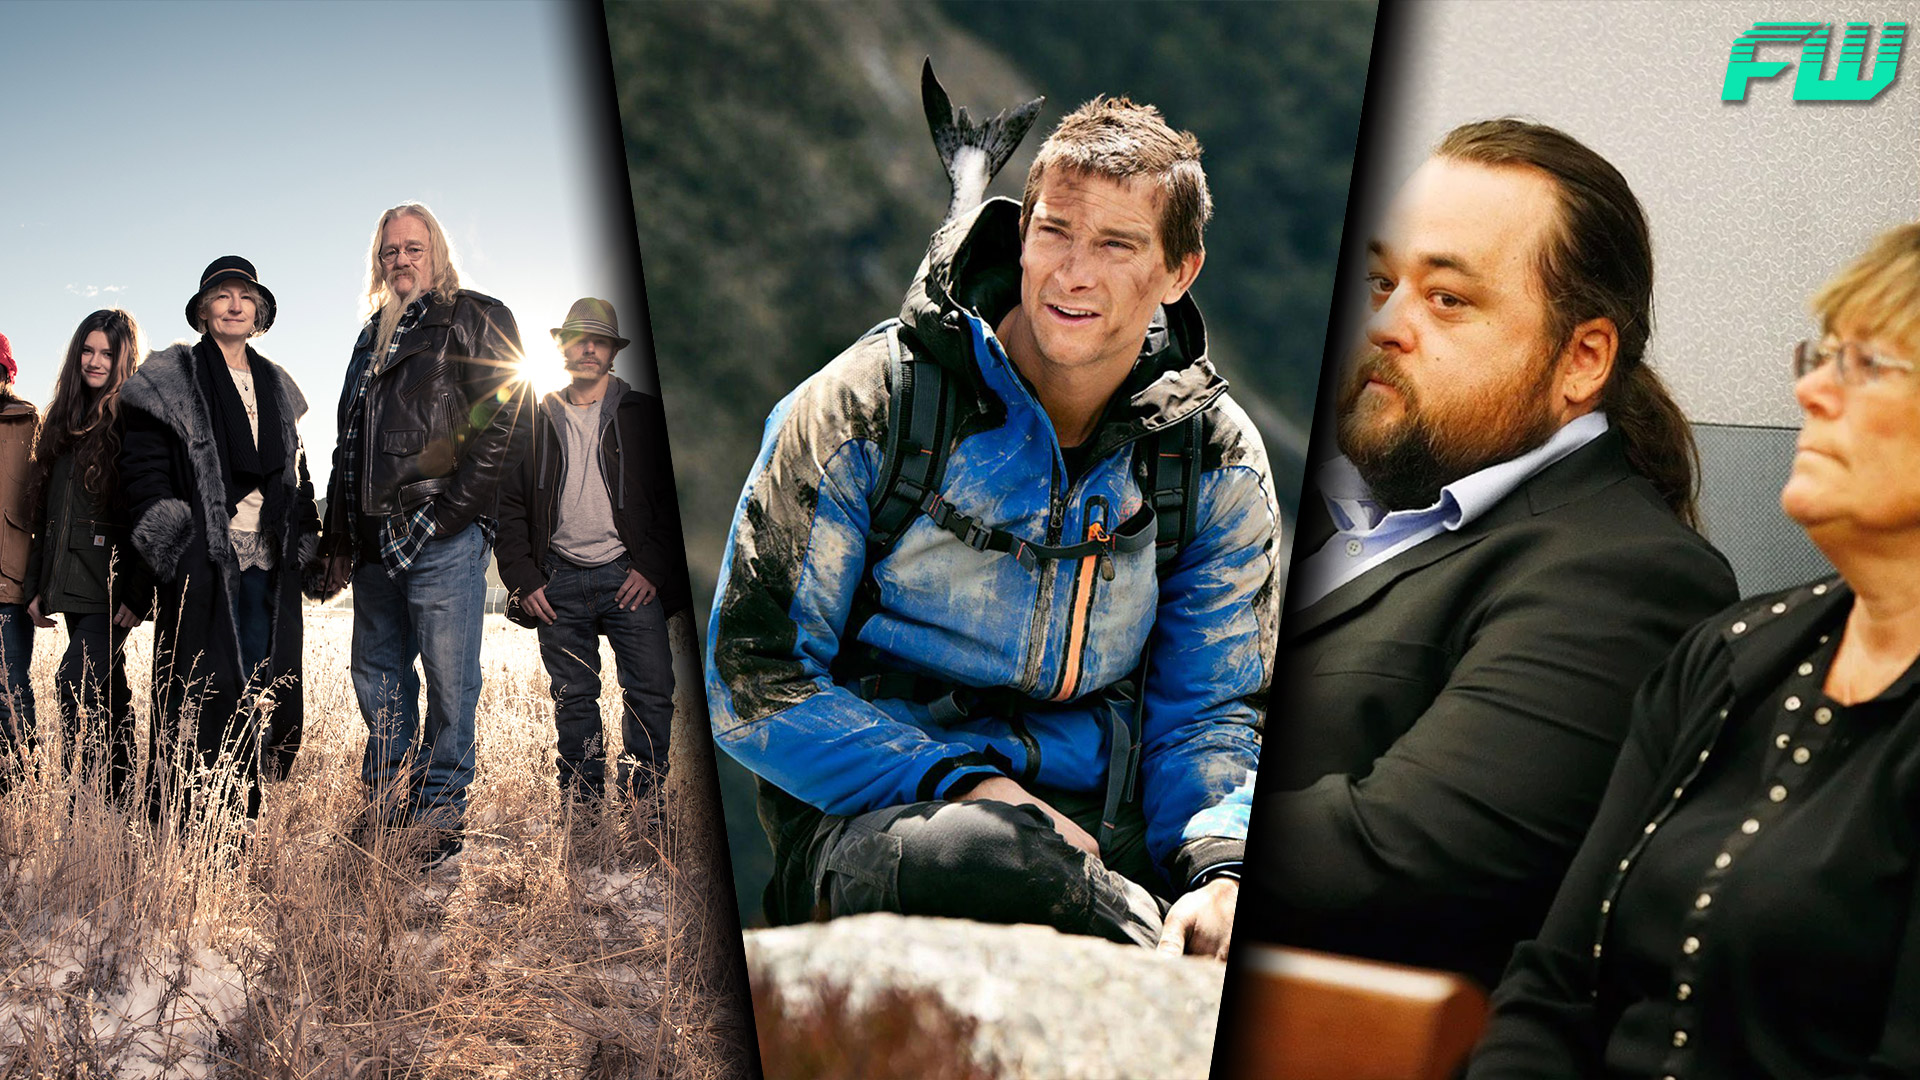 Bear Grylls Has an Episode of 'Man vs. Wild' He Loved More Than the Rest